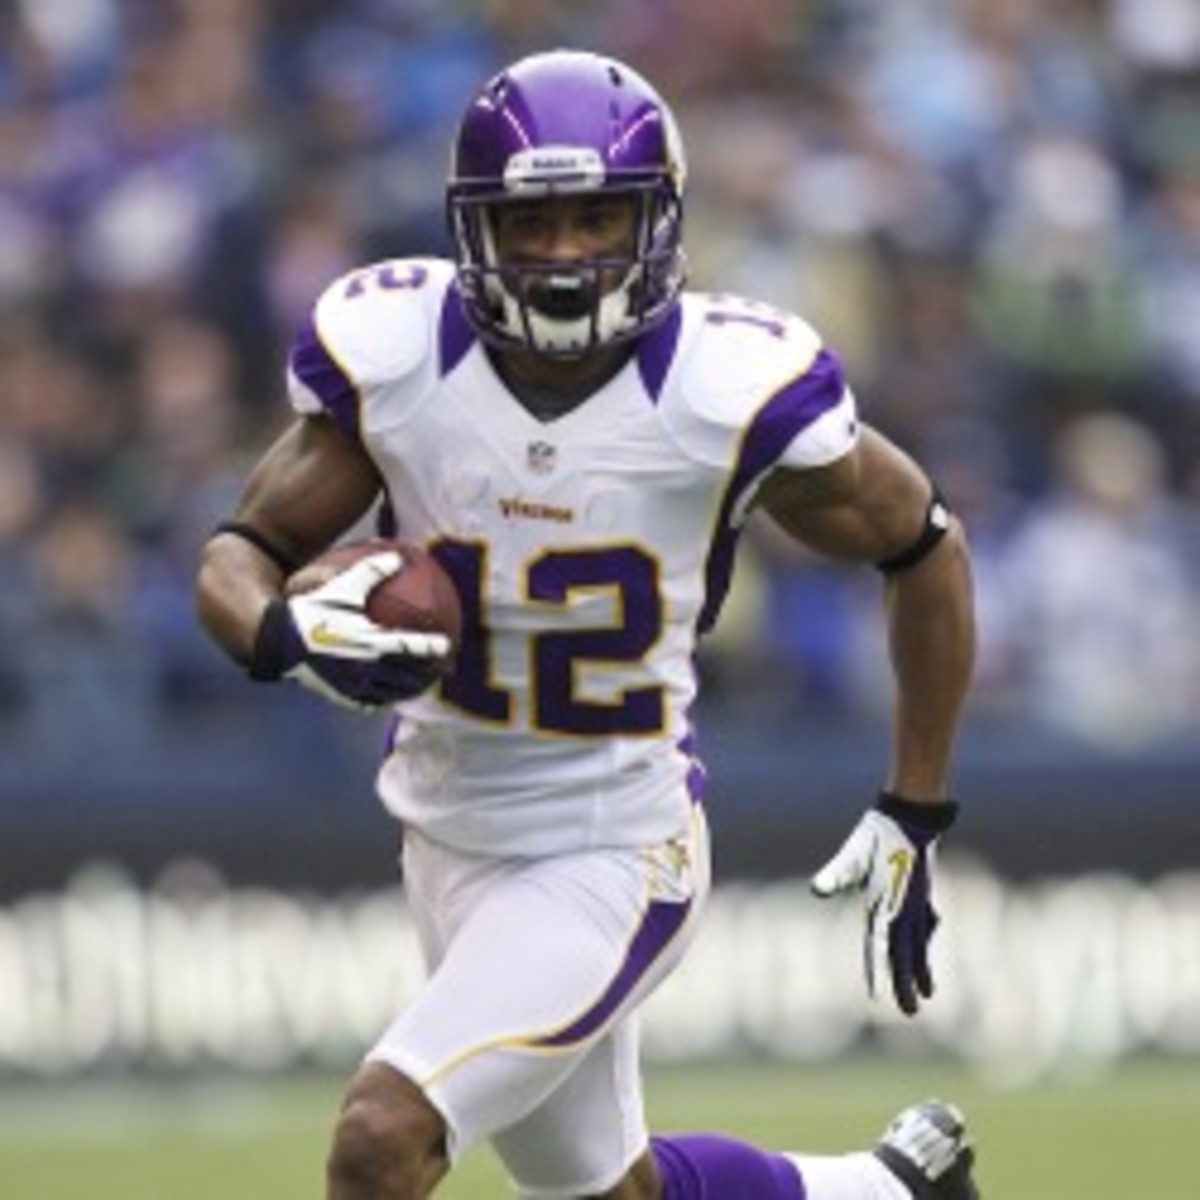 VIkings receiver Percy Harvin will not play Sunday because of an ankle Injury. (Stephen Brashear/Getty Images)